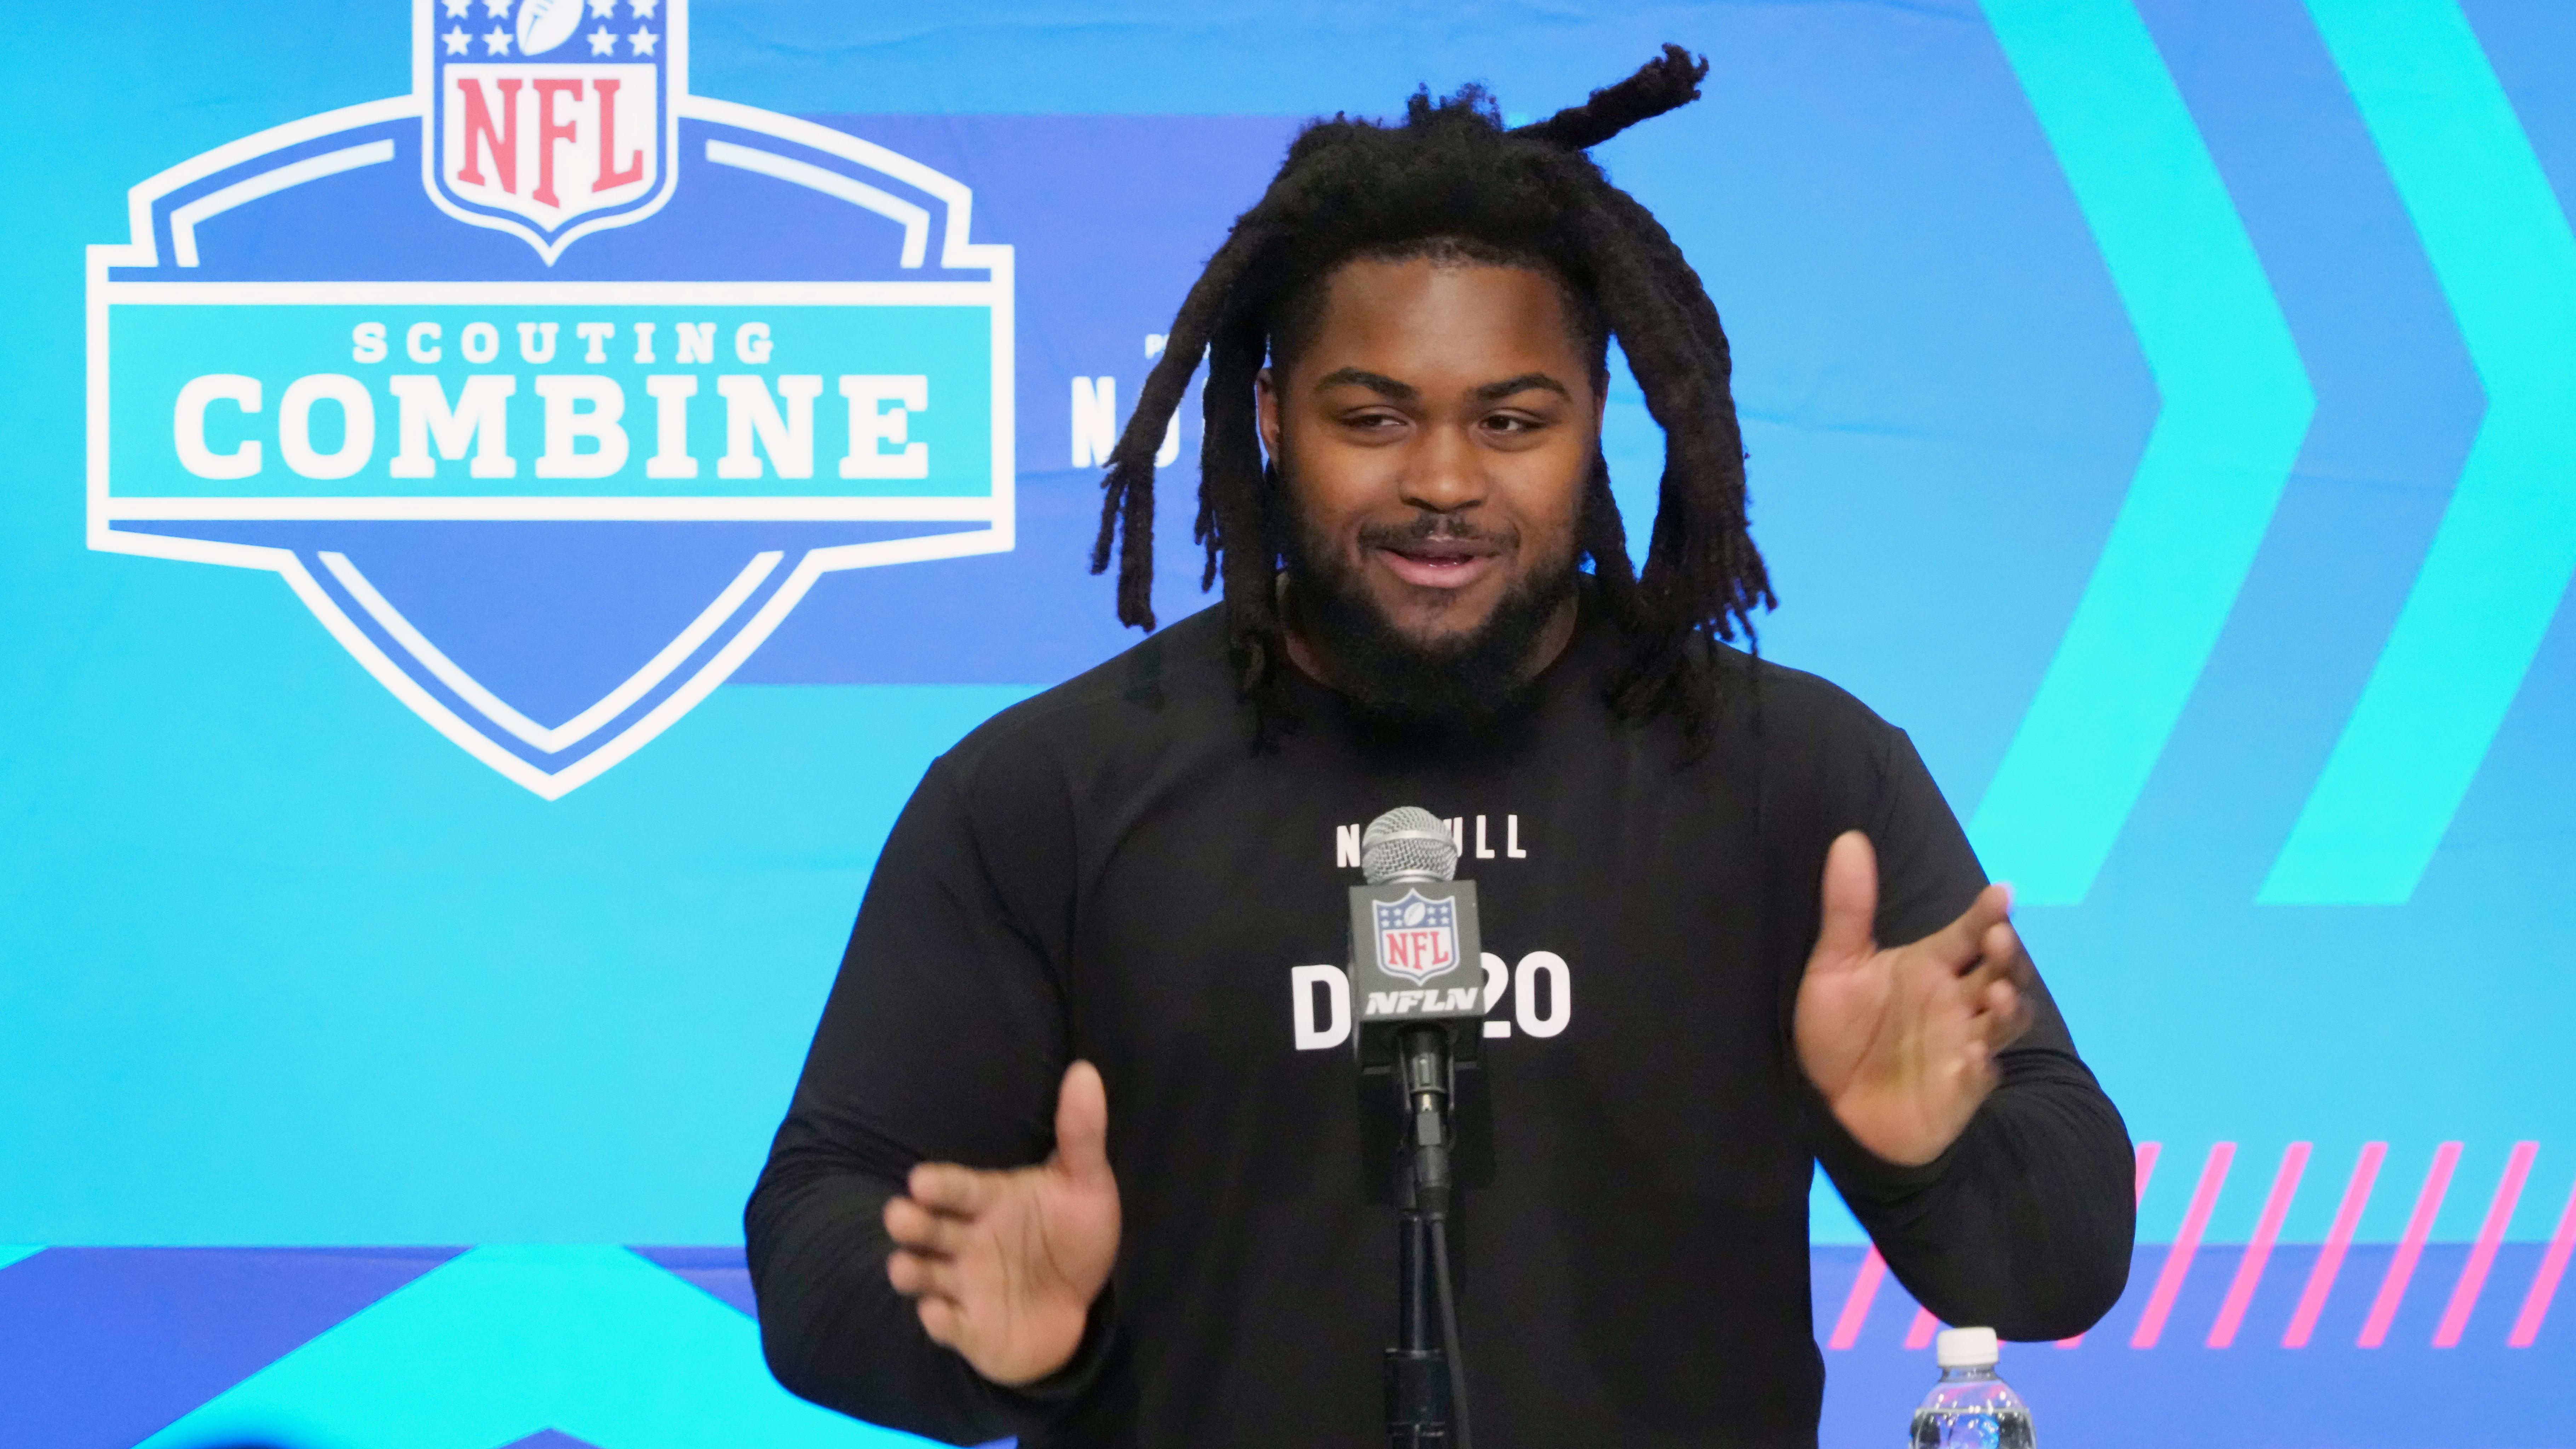 Illinois defensive lineman Johnny Newton (DL20) speaks at the NFL Scouting Combine.